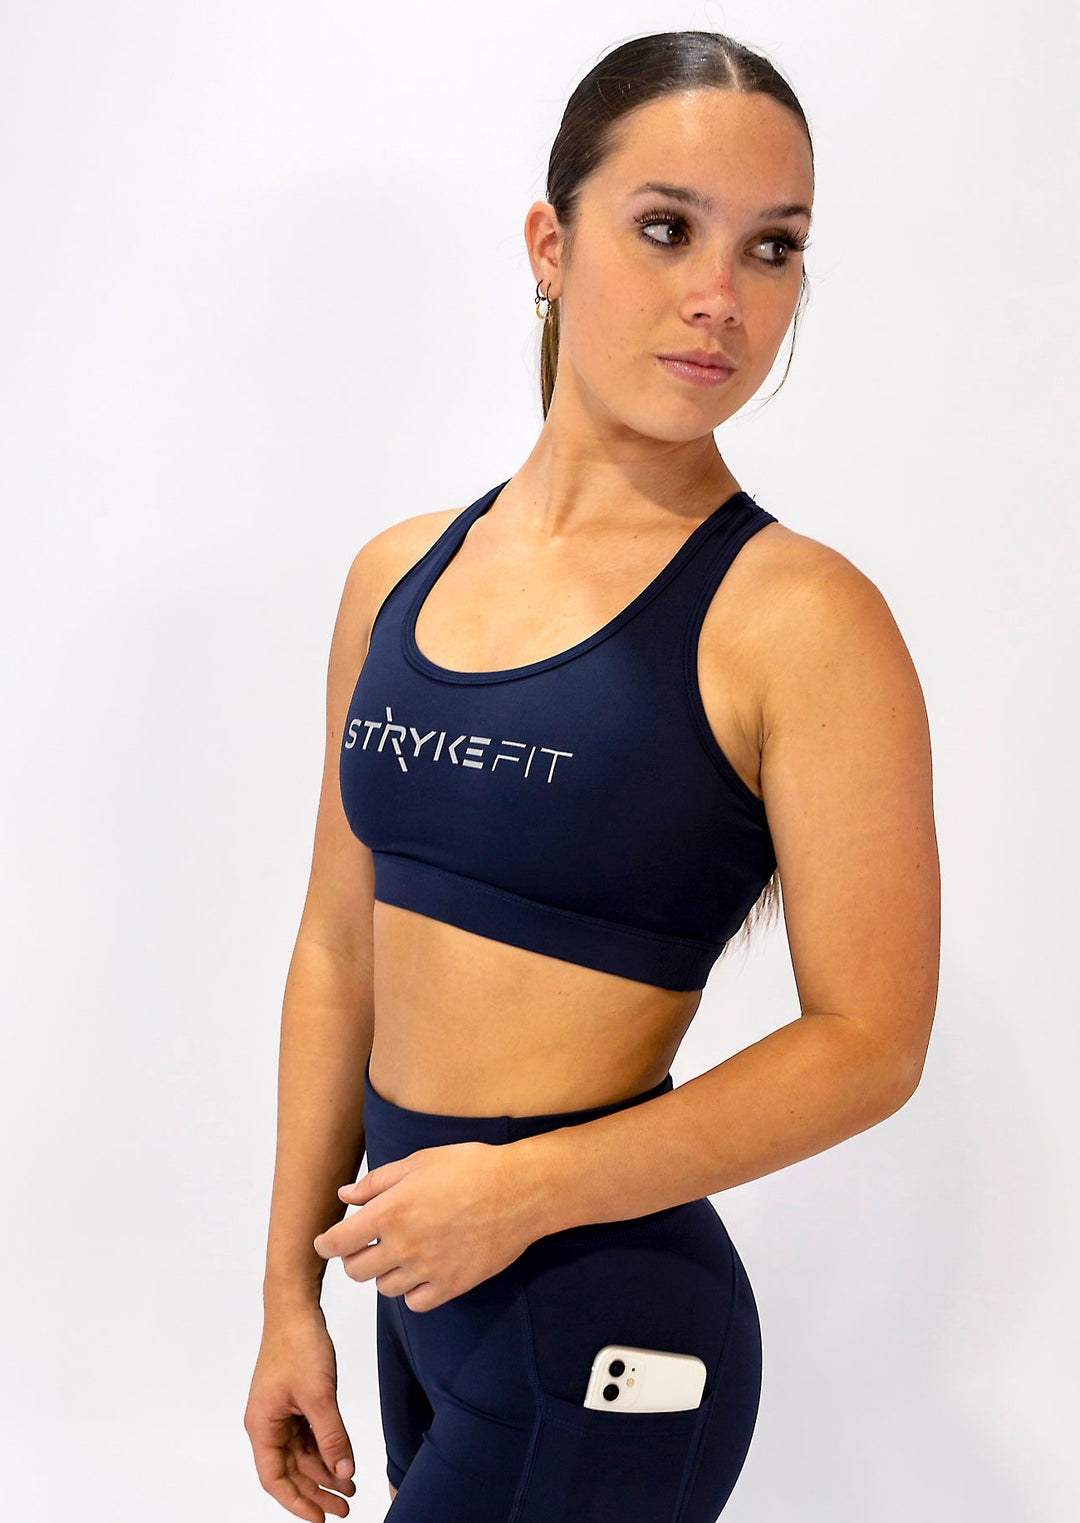 The STRYKE RUNNING CROP TOP is designed with a back phone pocket enabling you to carry your phone effortlessly while wearing, allowing you to listen to music, podcasts, or even just having it on you for personal security. The racerback straps follow the curve of your shoulder blades to allow your arms to move freely while offering maximum support. The reflective logo on the front chest and back help to enhance visibility in low light.